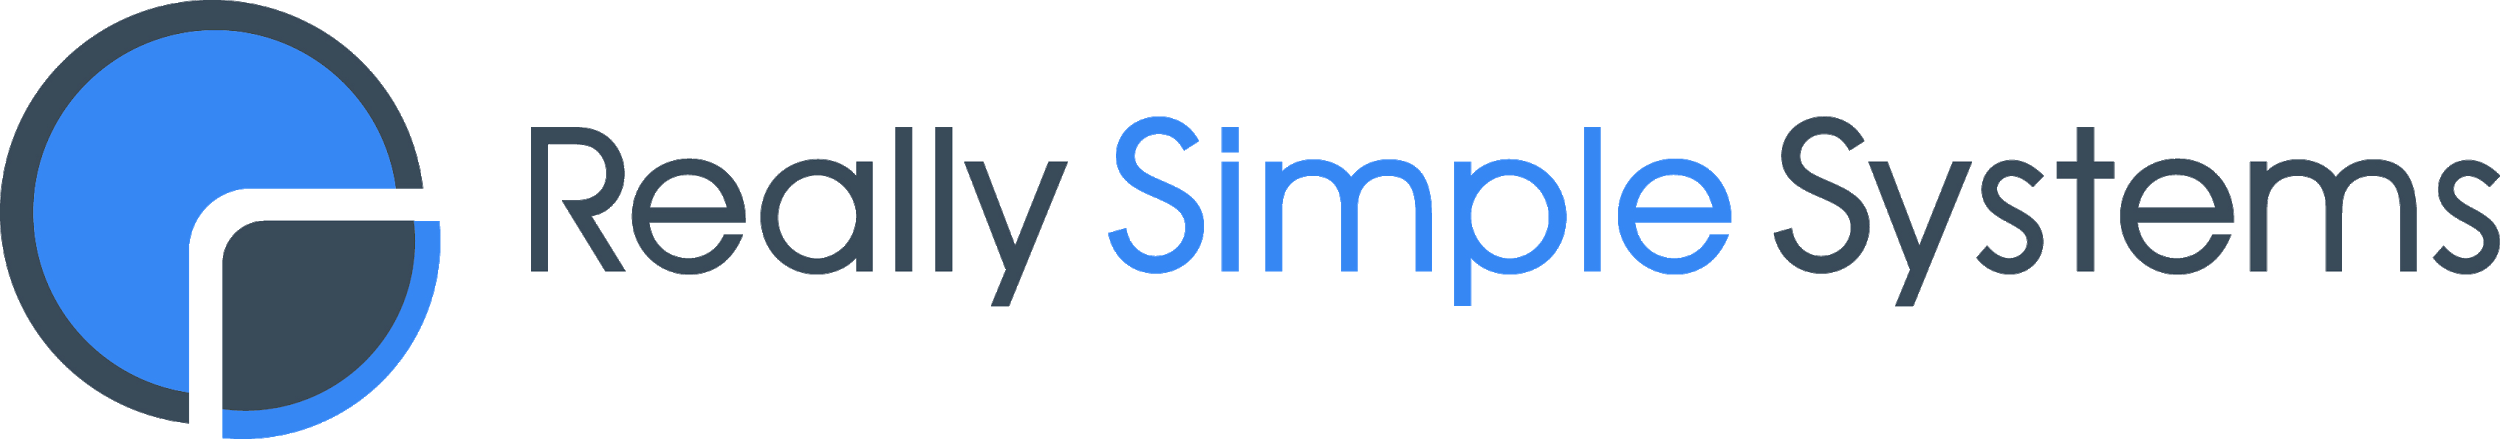 Really Simple Systems logo